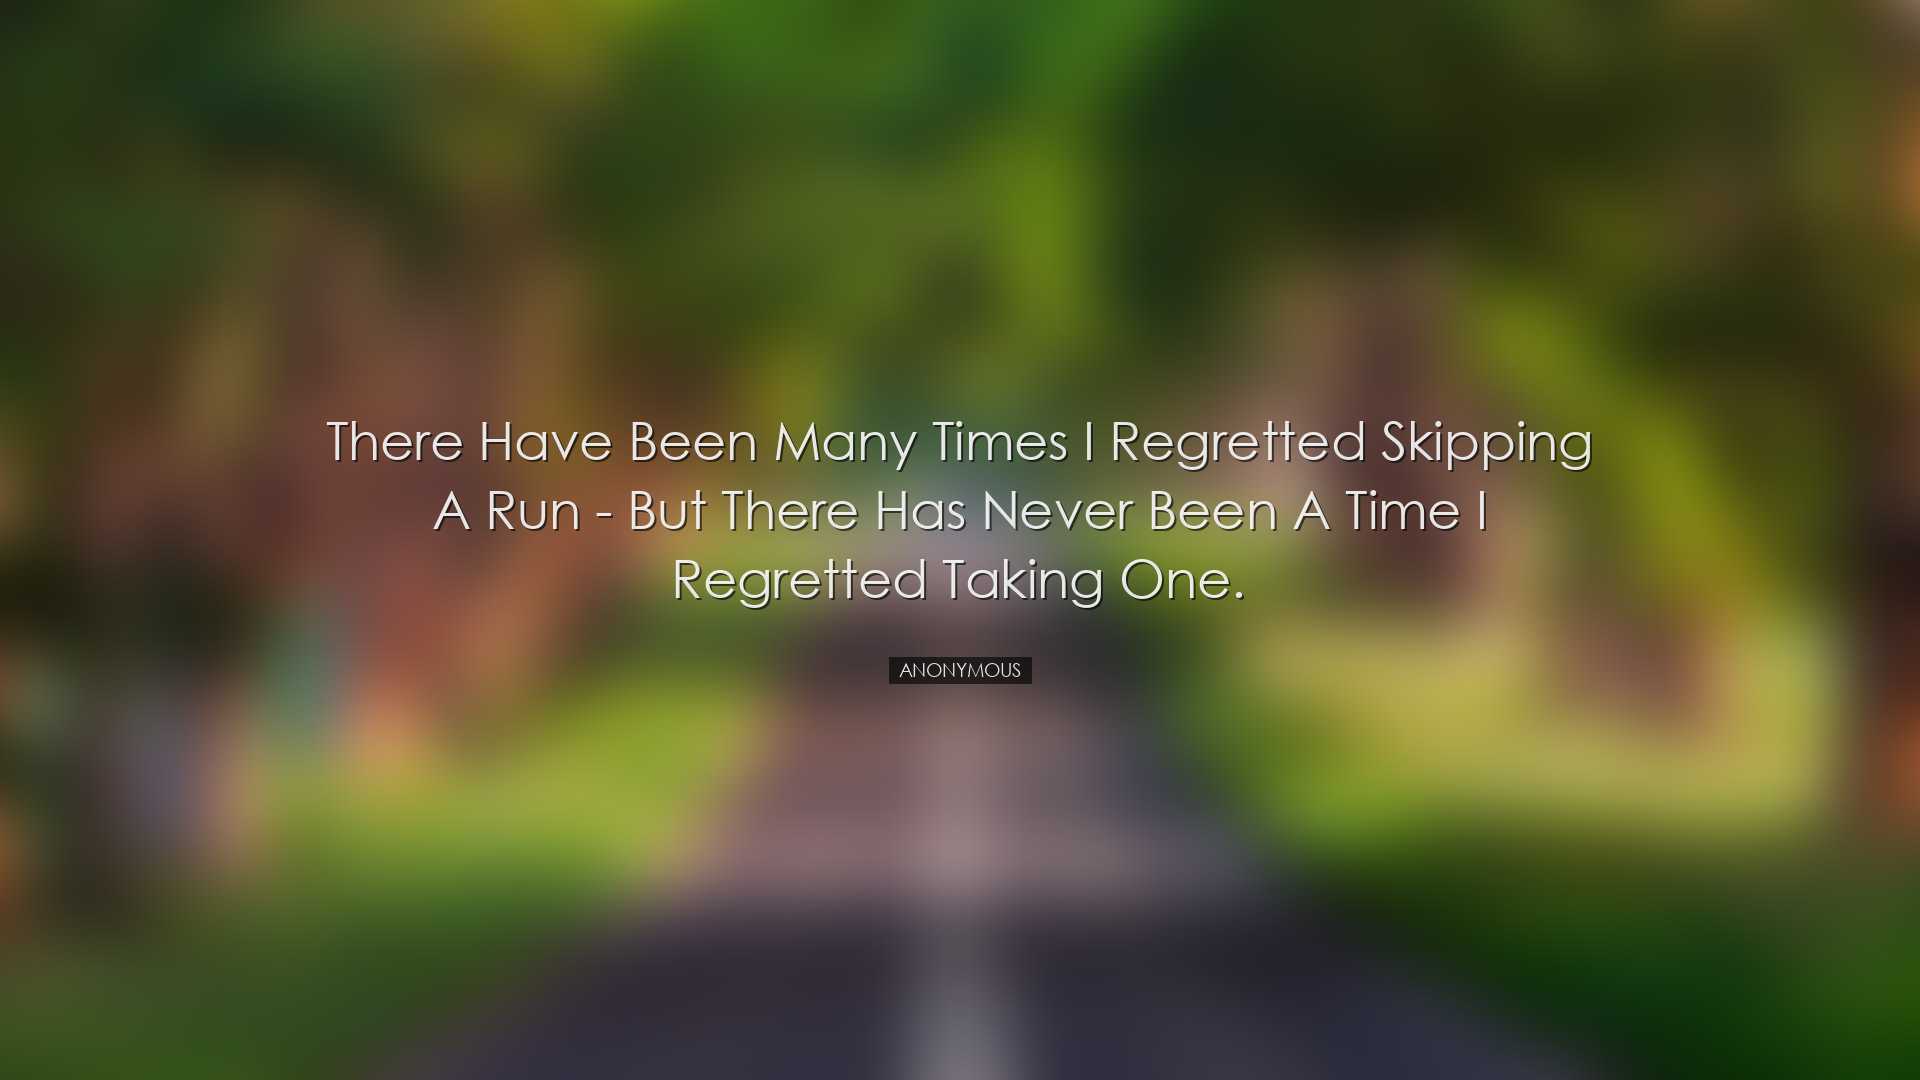 There have been many times I regretted skipping a run - but there